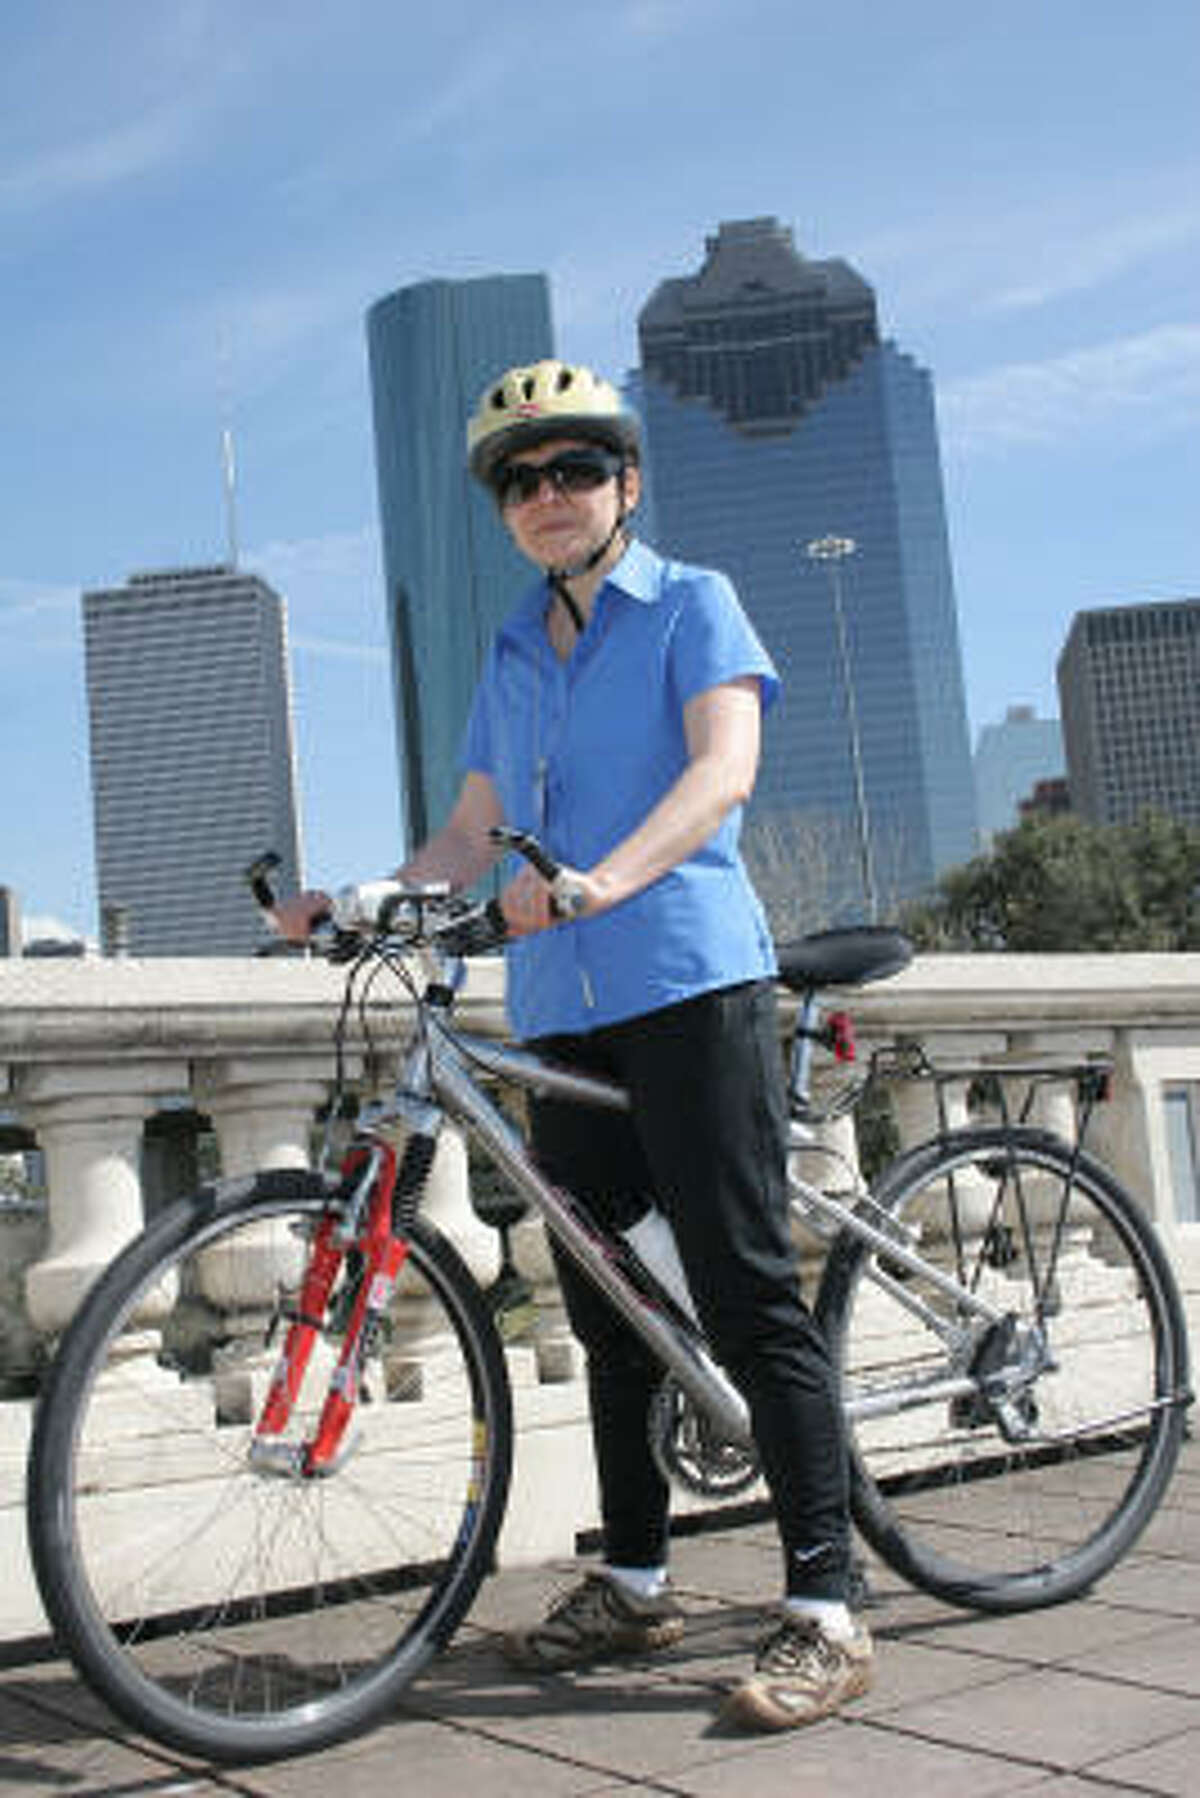 Lilibeth Andre, the city's bicycle-pedestrian coordinator since 2001, is in charge of the roll-out of the Houston Comprehensive Bikeway Network Plan, which aims to encourage cycling as a way to reduce the use of cars.